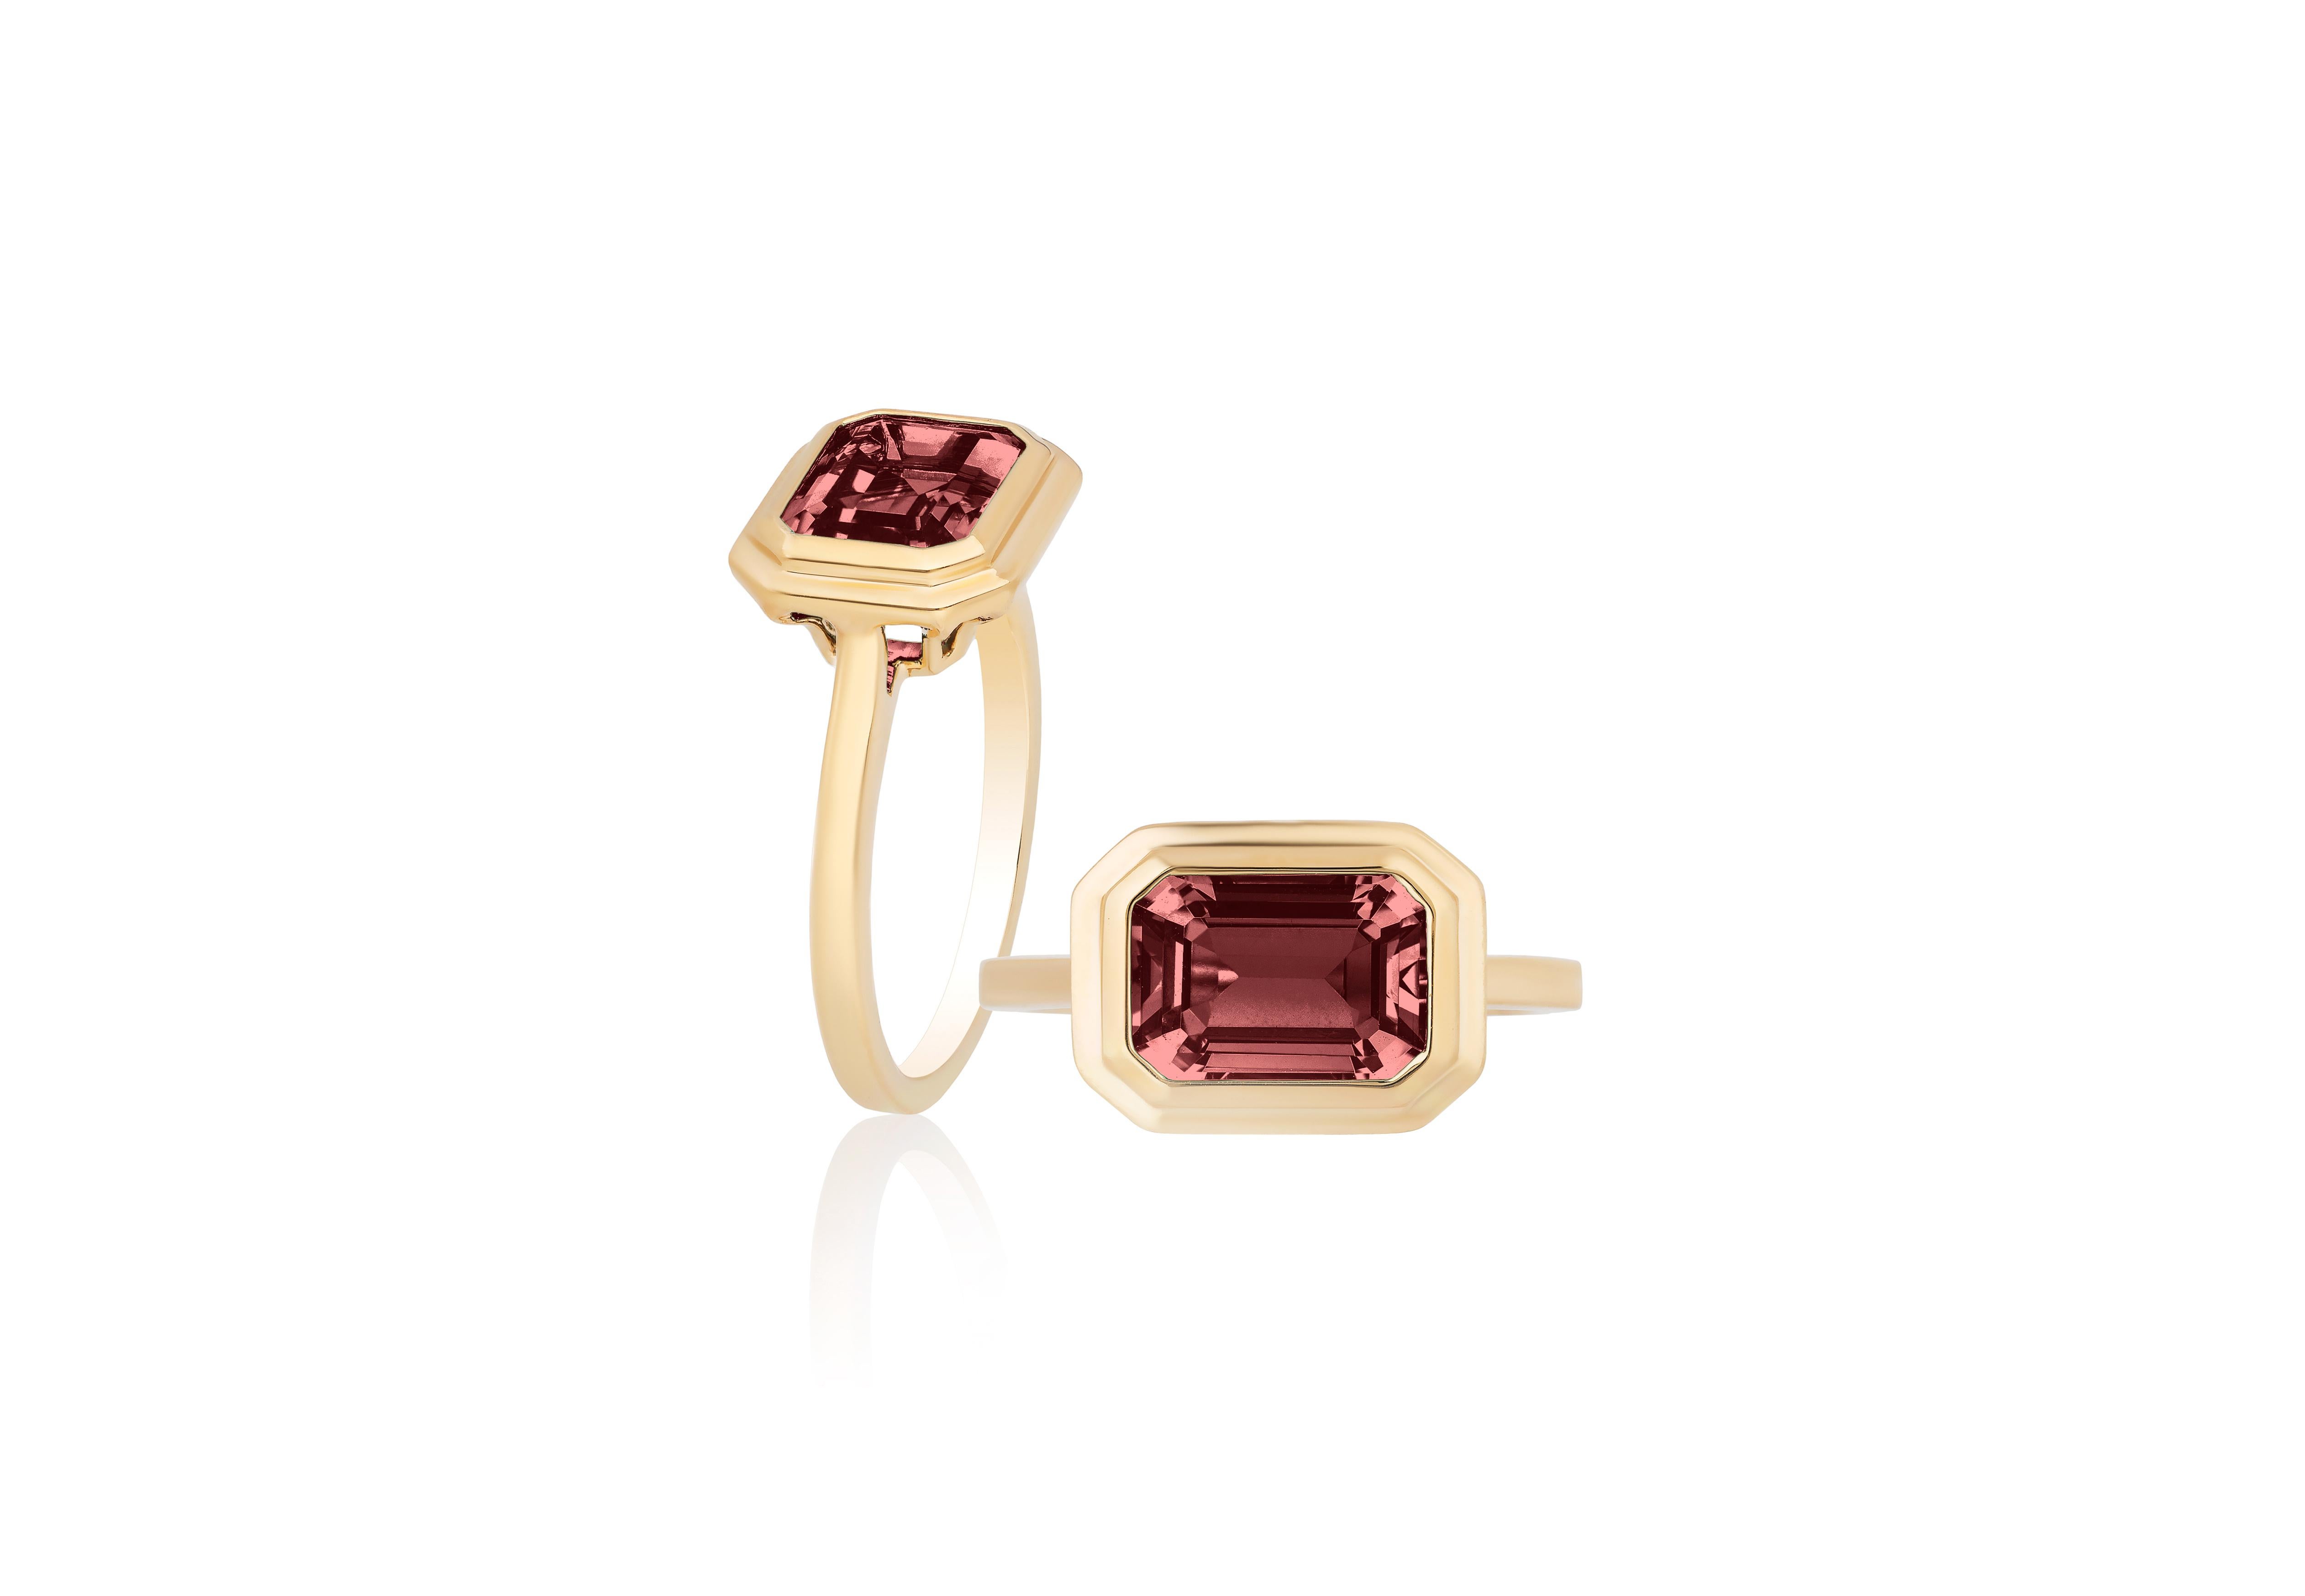 The Pink Tourmaline Horizontal Emerald Cut Ring is a breathtaking piece of jewelry from the 